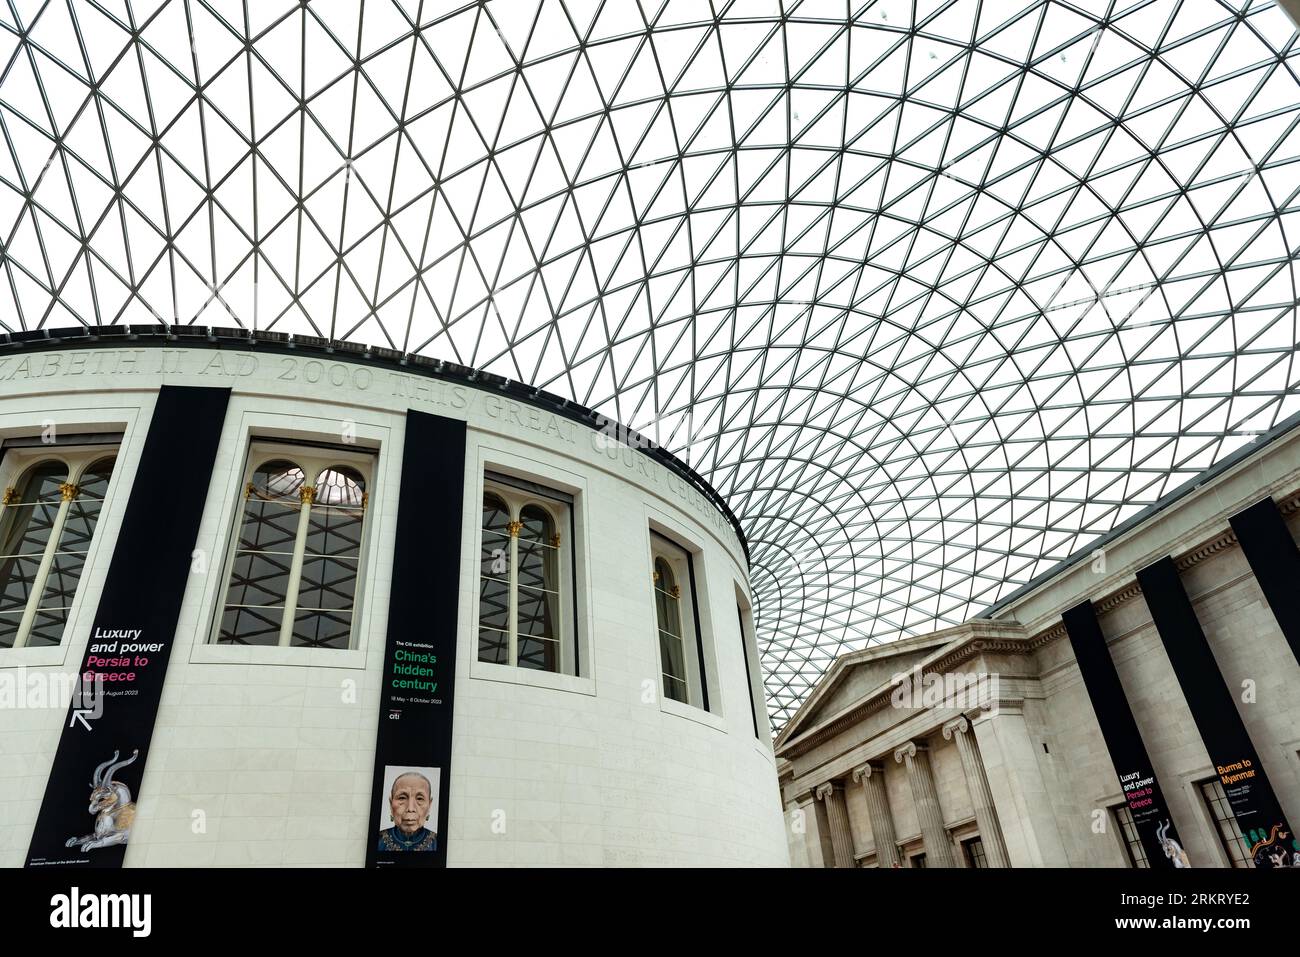 August 2nd London, United Kingdom Architecture of the Entrance Hall to the British Museum, London, Vereinigtes Königreich Stockfoto